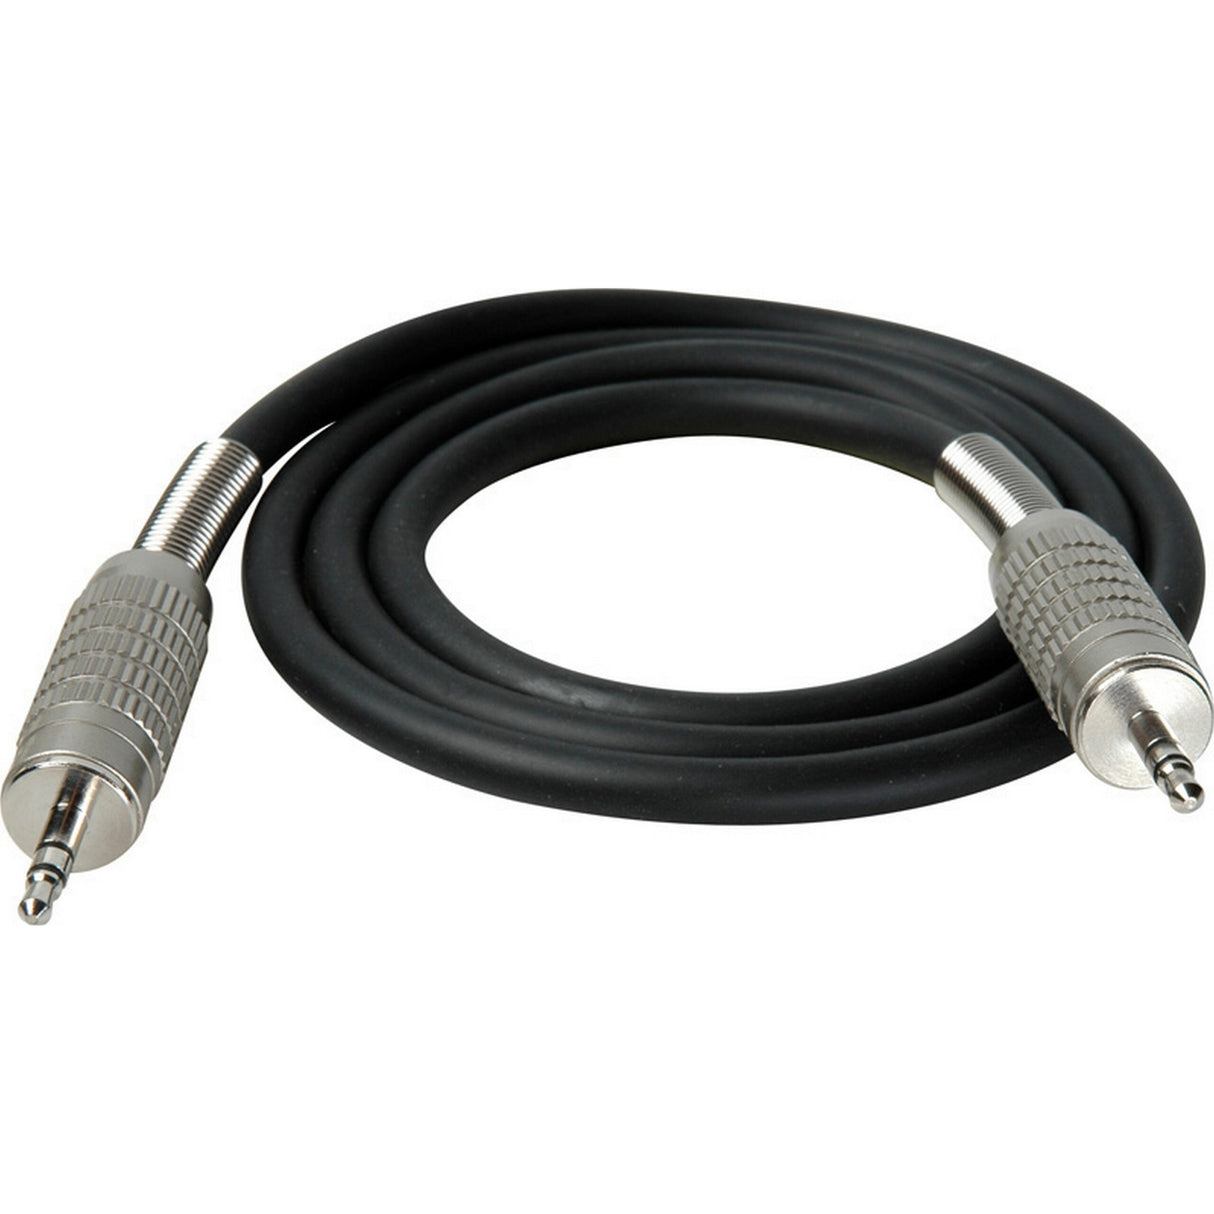 Connectronics Premium Stereo Mini Male to Stereo Mini Male Audio Cable, 25 Foot